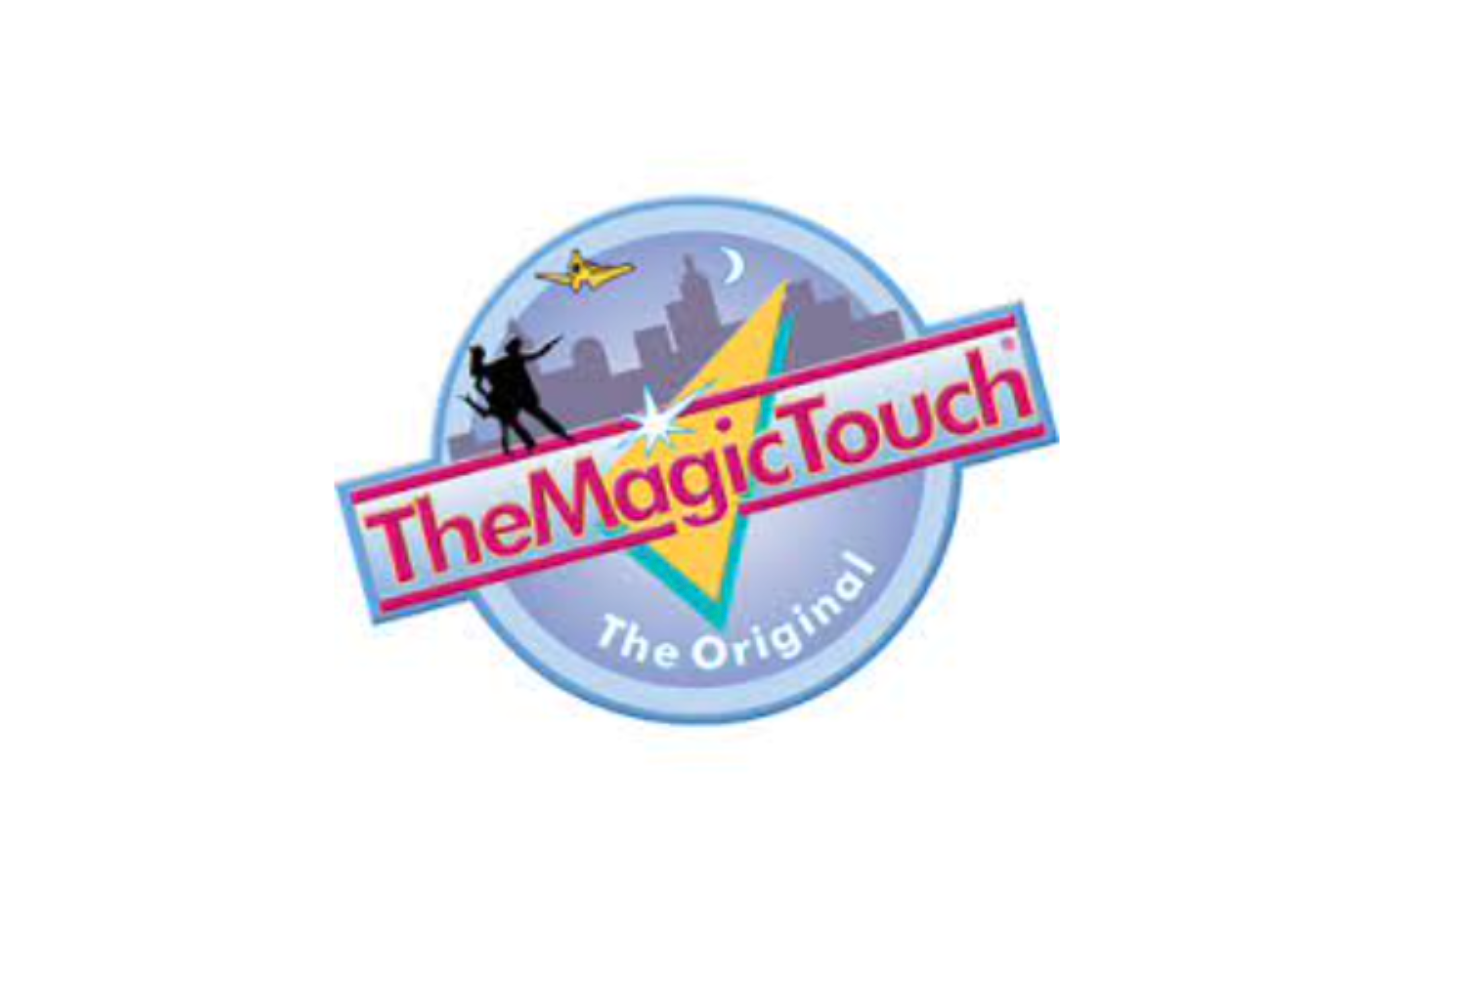 The Magic Touch Temporary Tattoo A4 Paper plus Adhesive Sheets 25 Sets | The Magic Touch